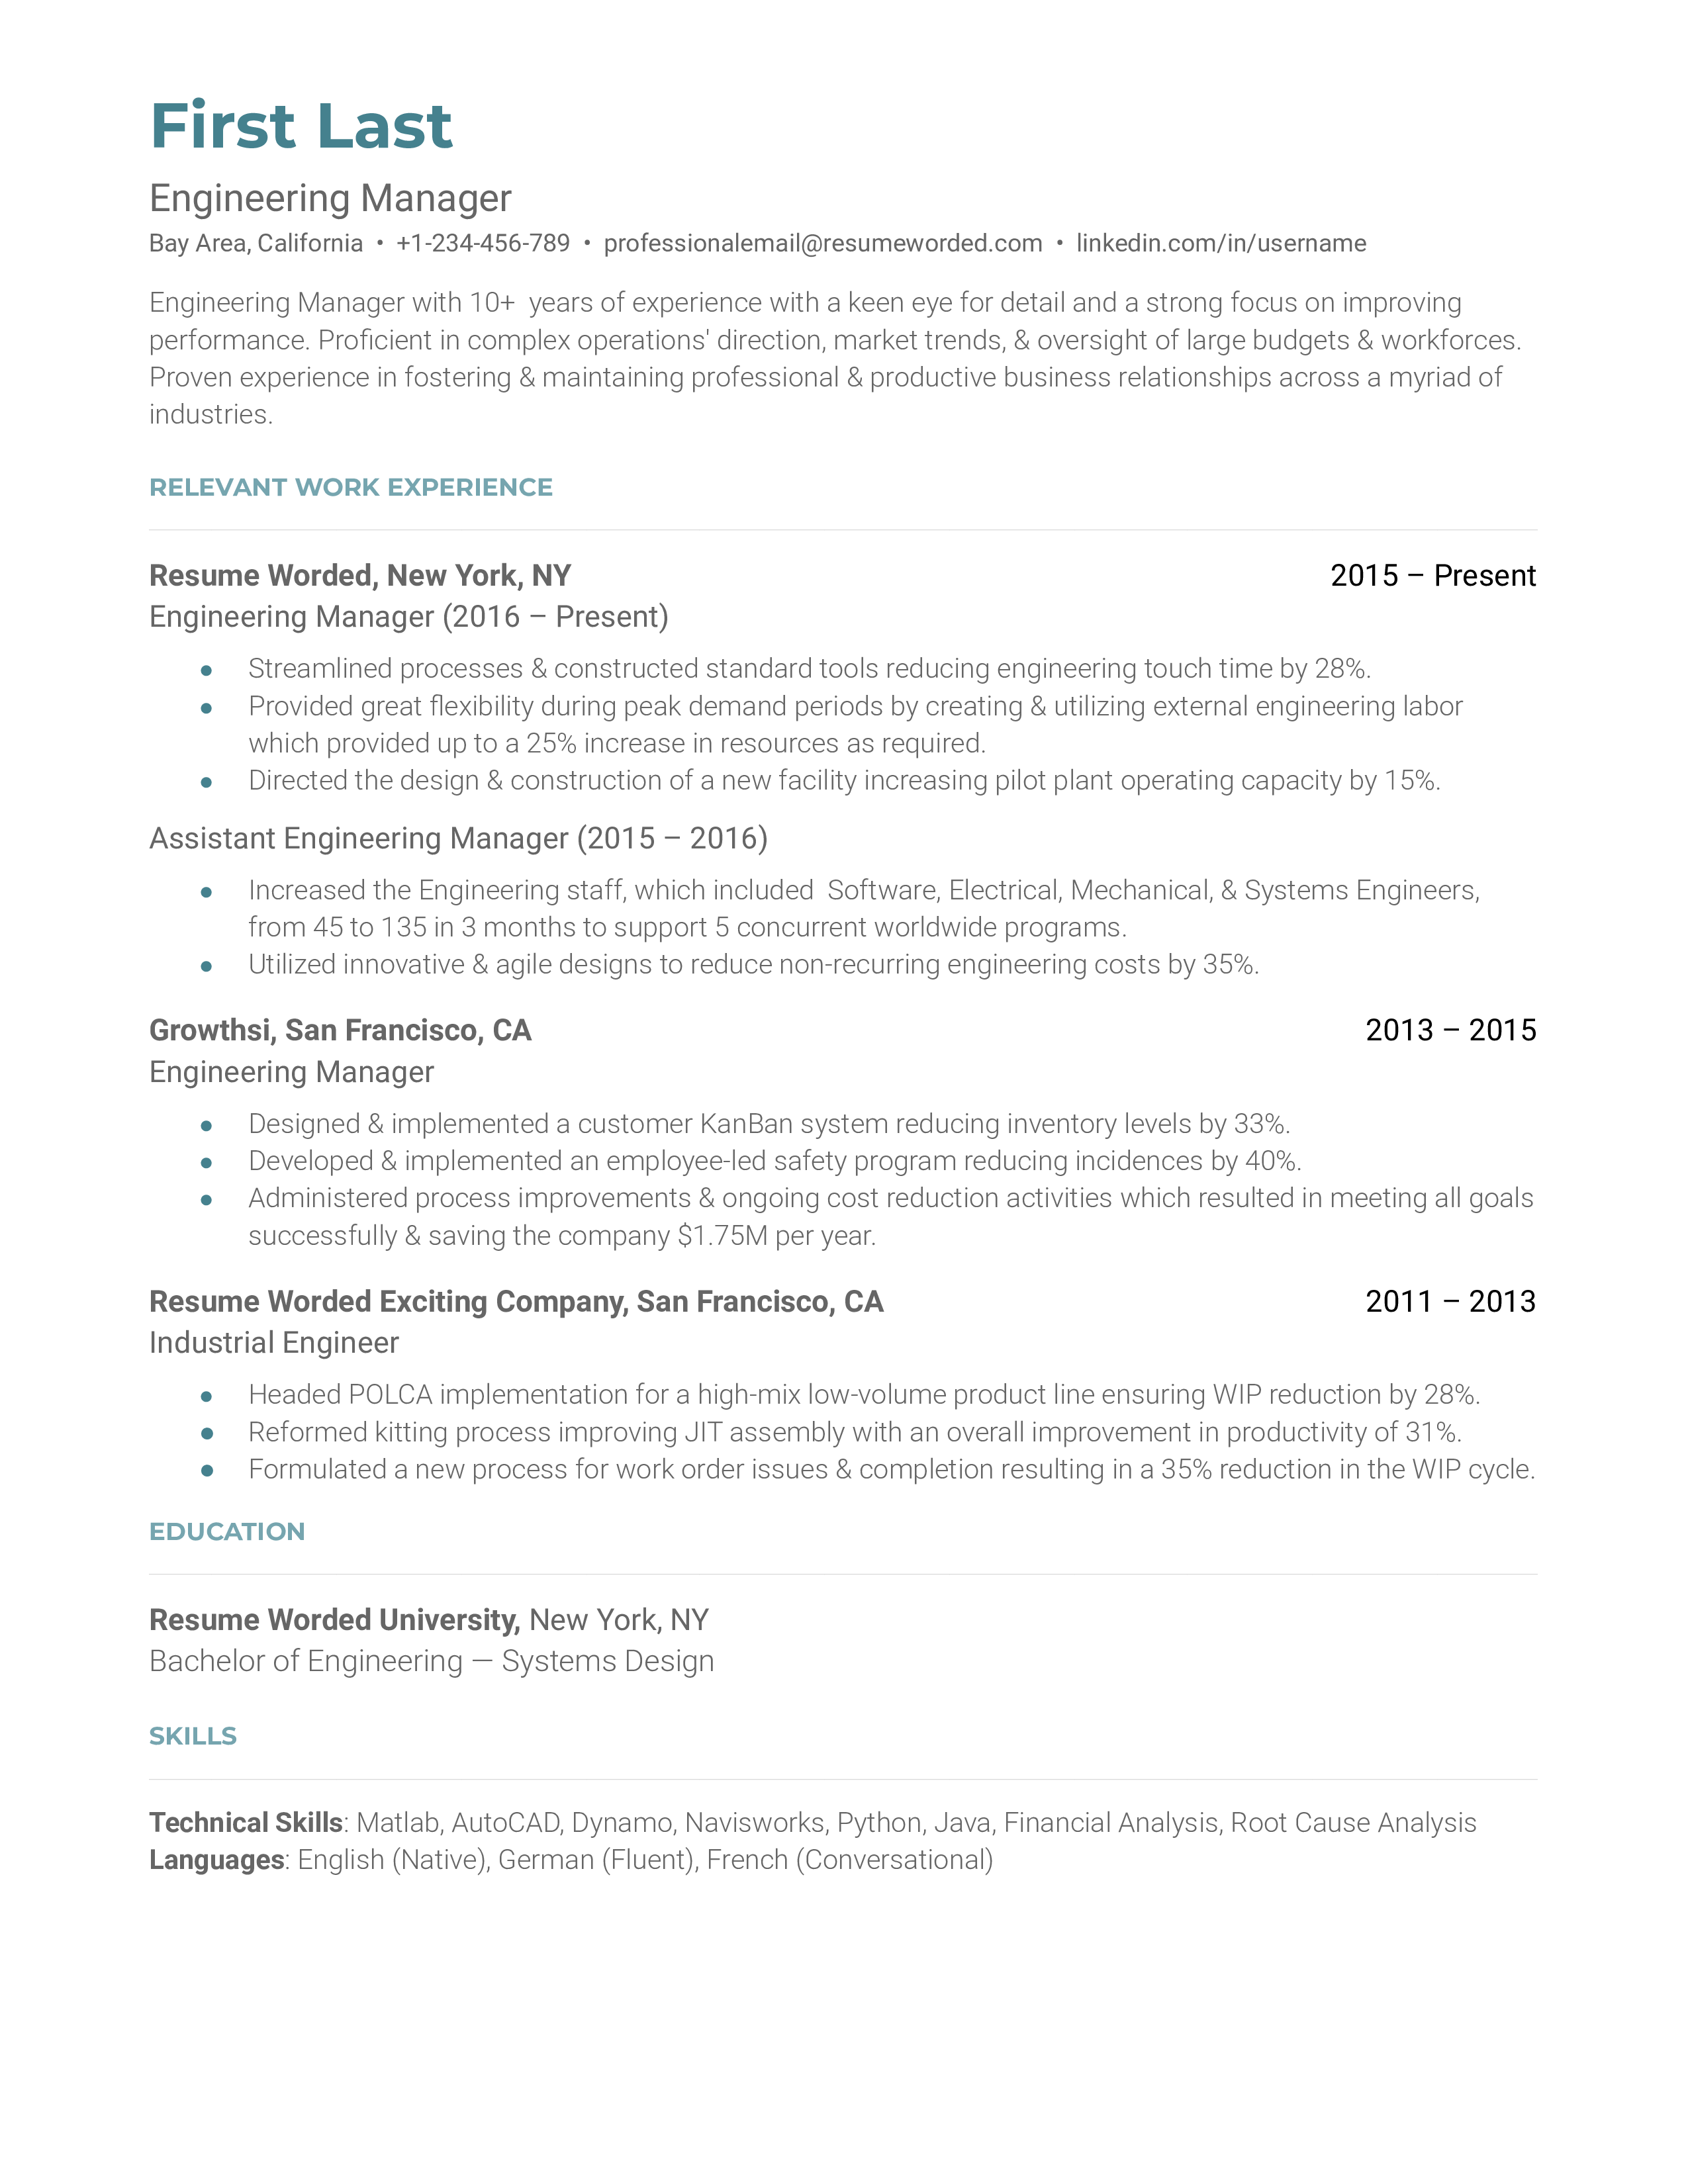 A professionally written CV targeting Engineering Manager roles.